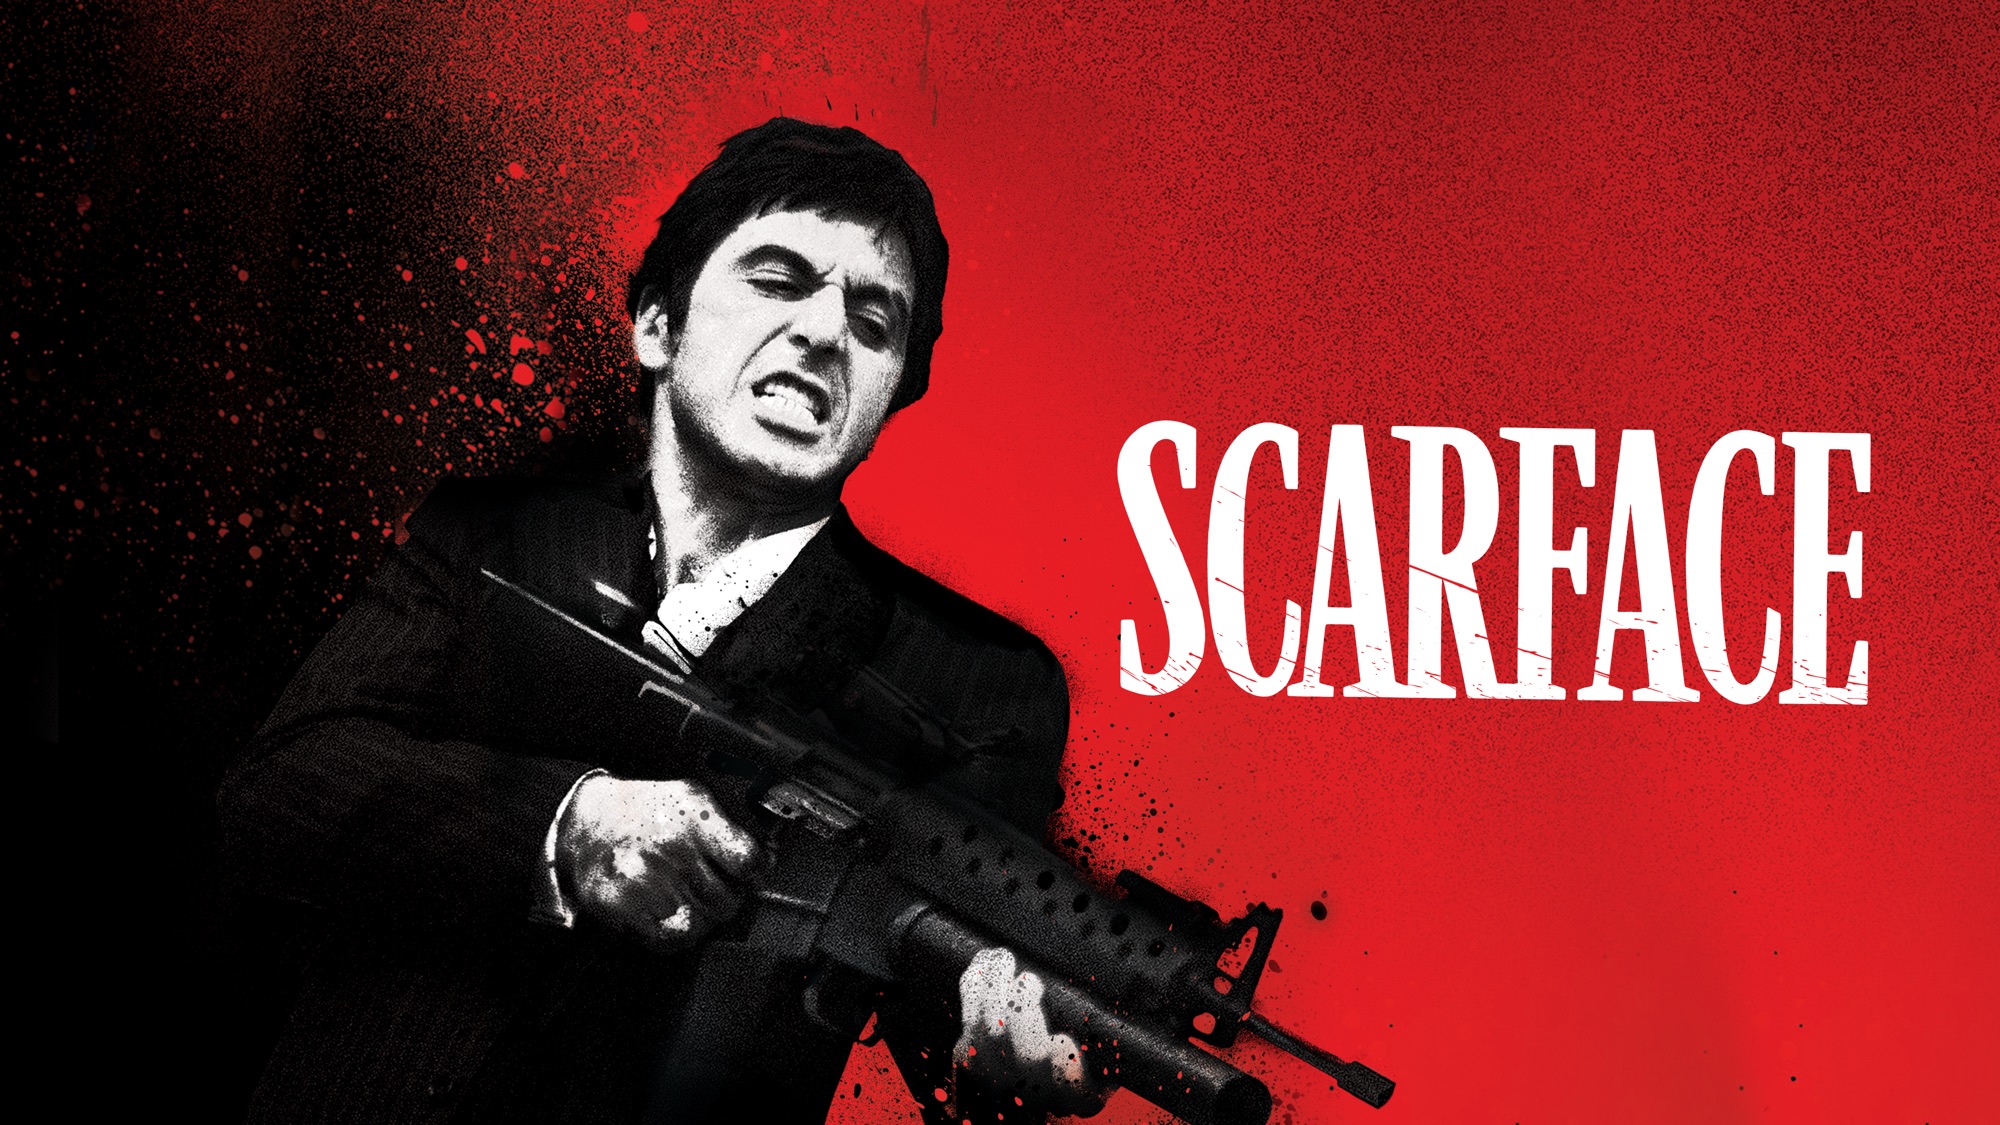 Tony Montana HD Wallpapers and Backgrounds. 